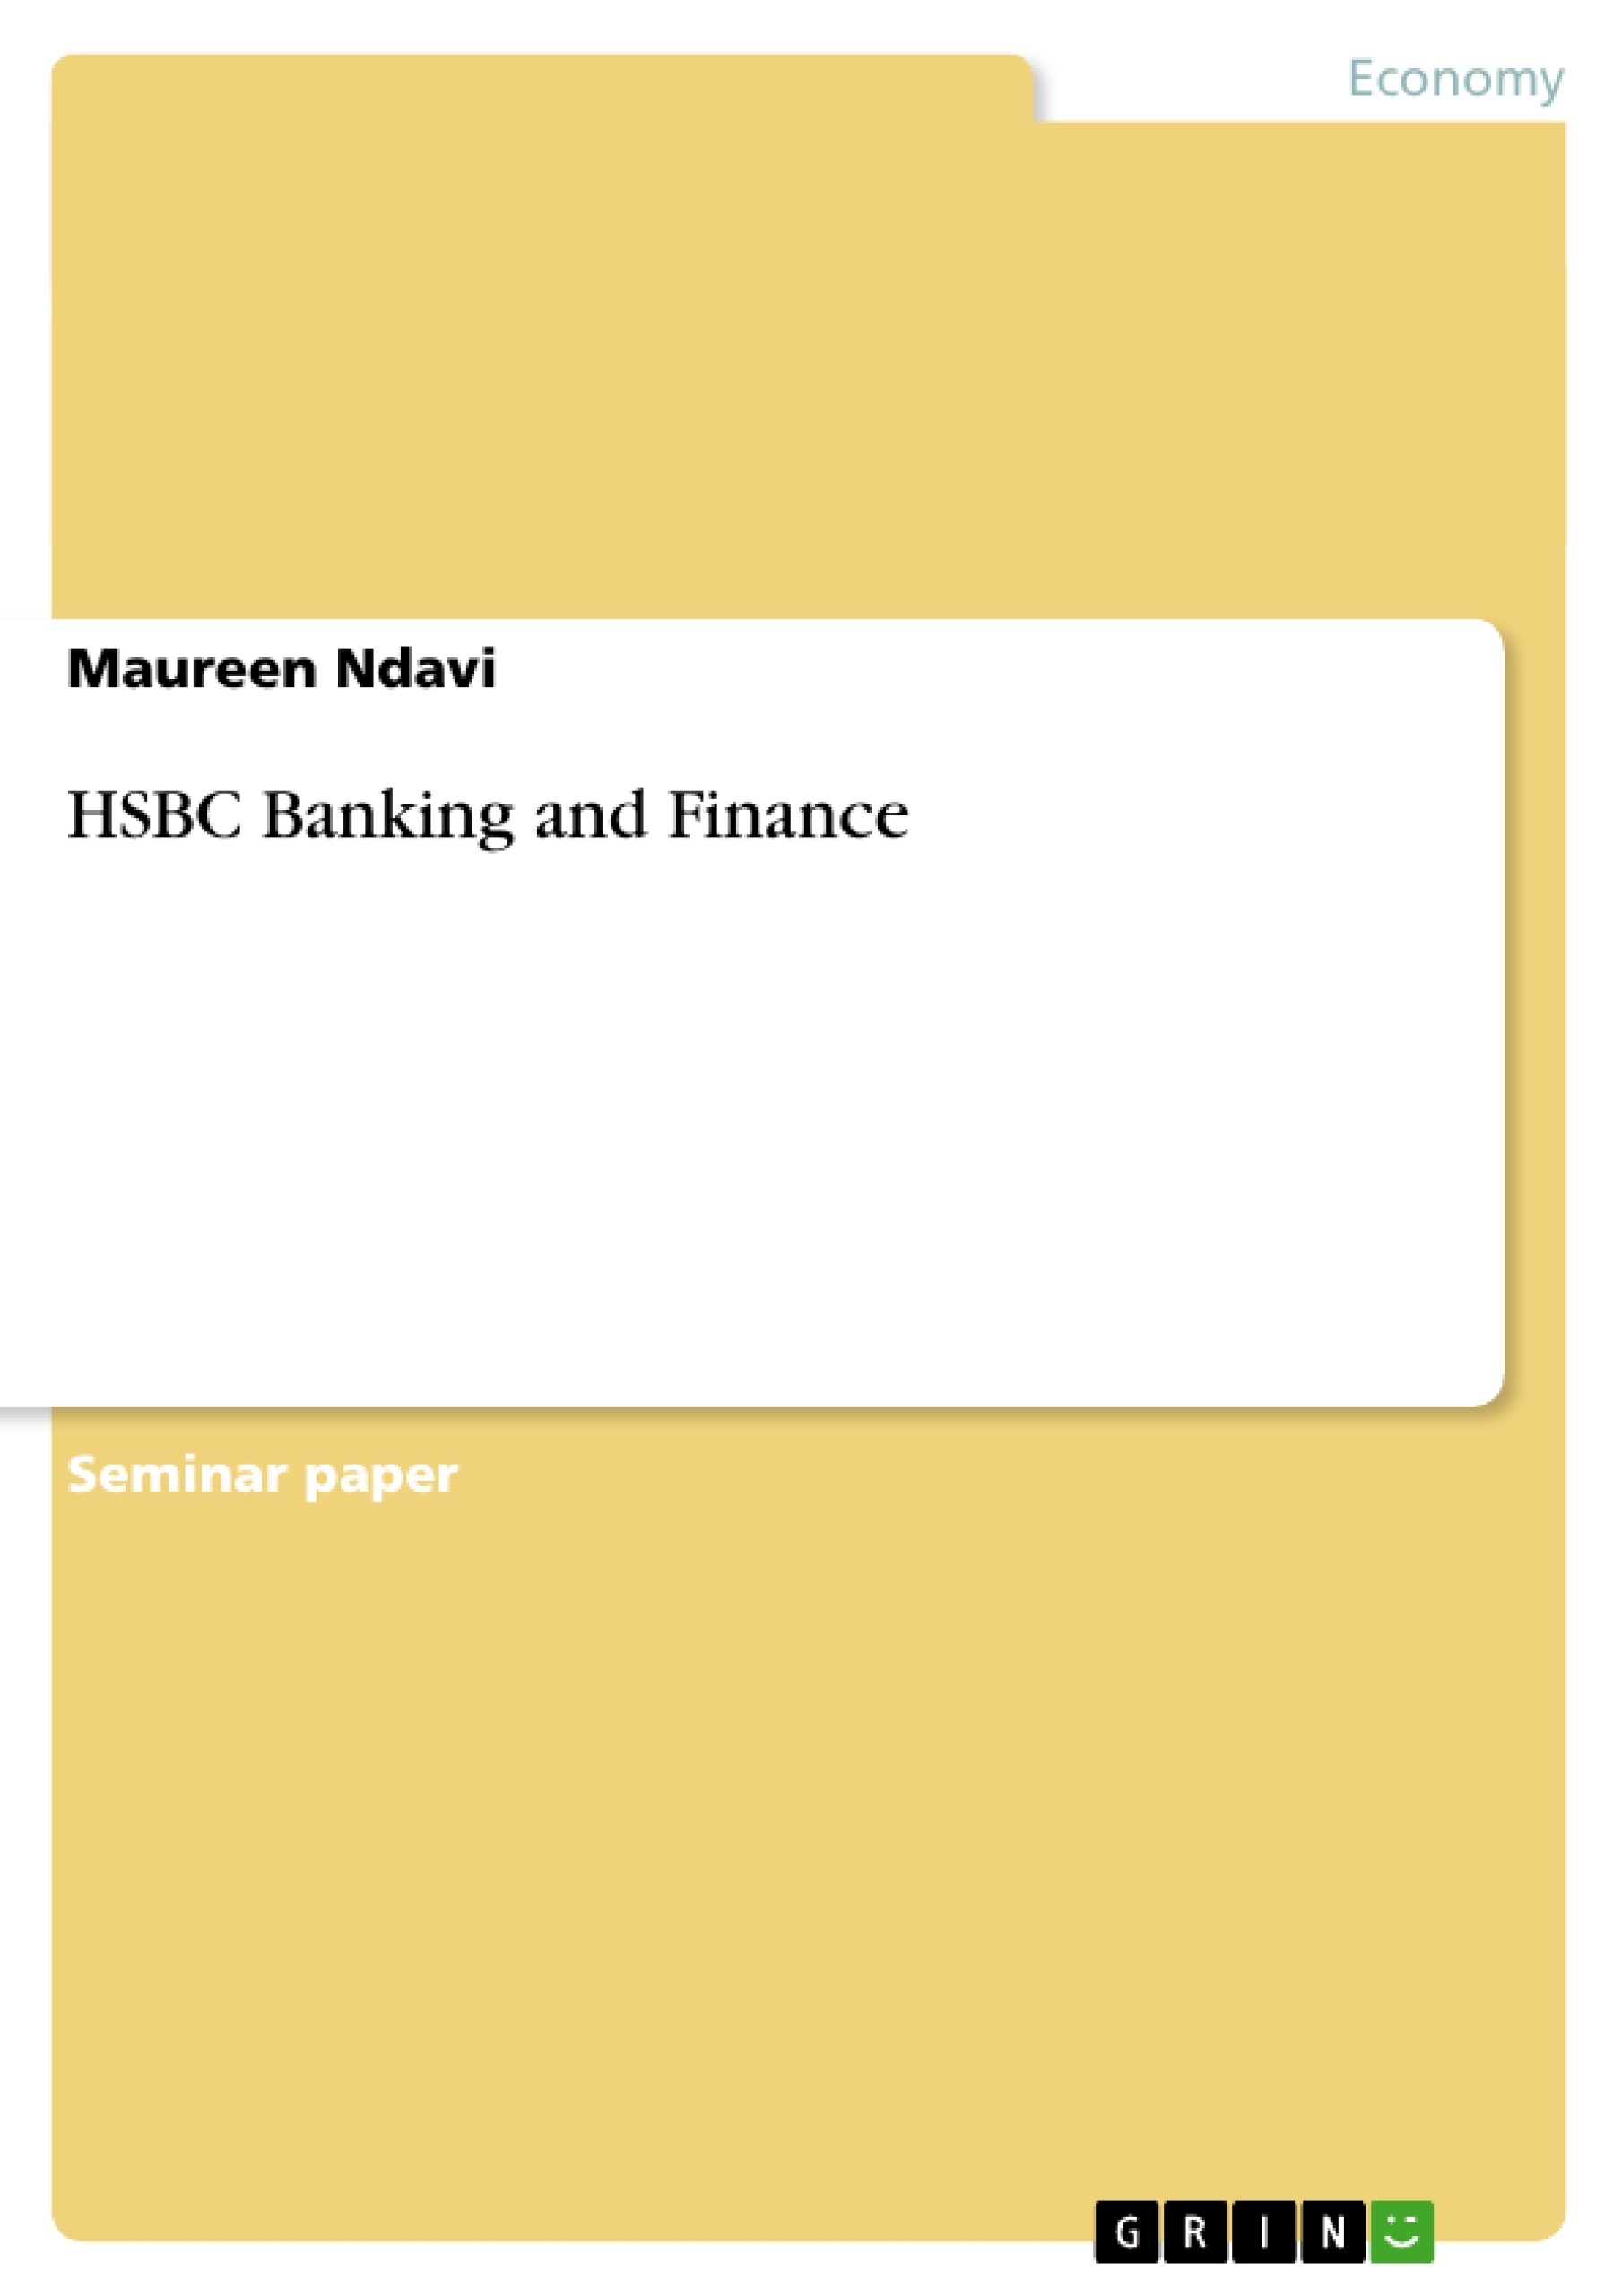 Title: HSBC Banking and Finance